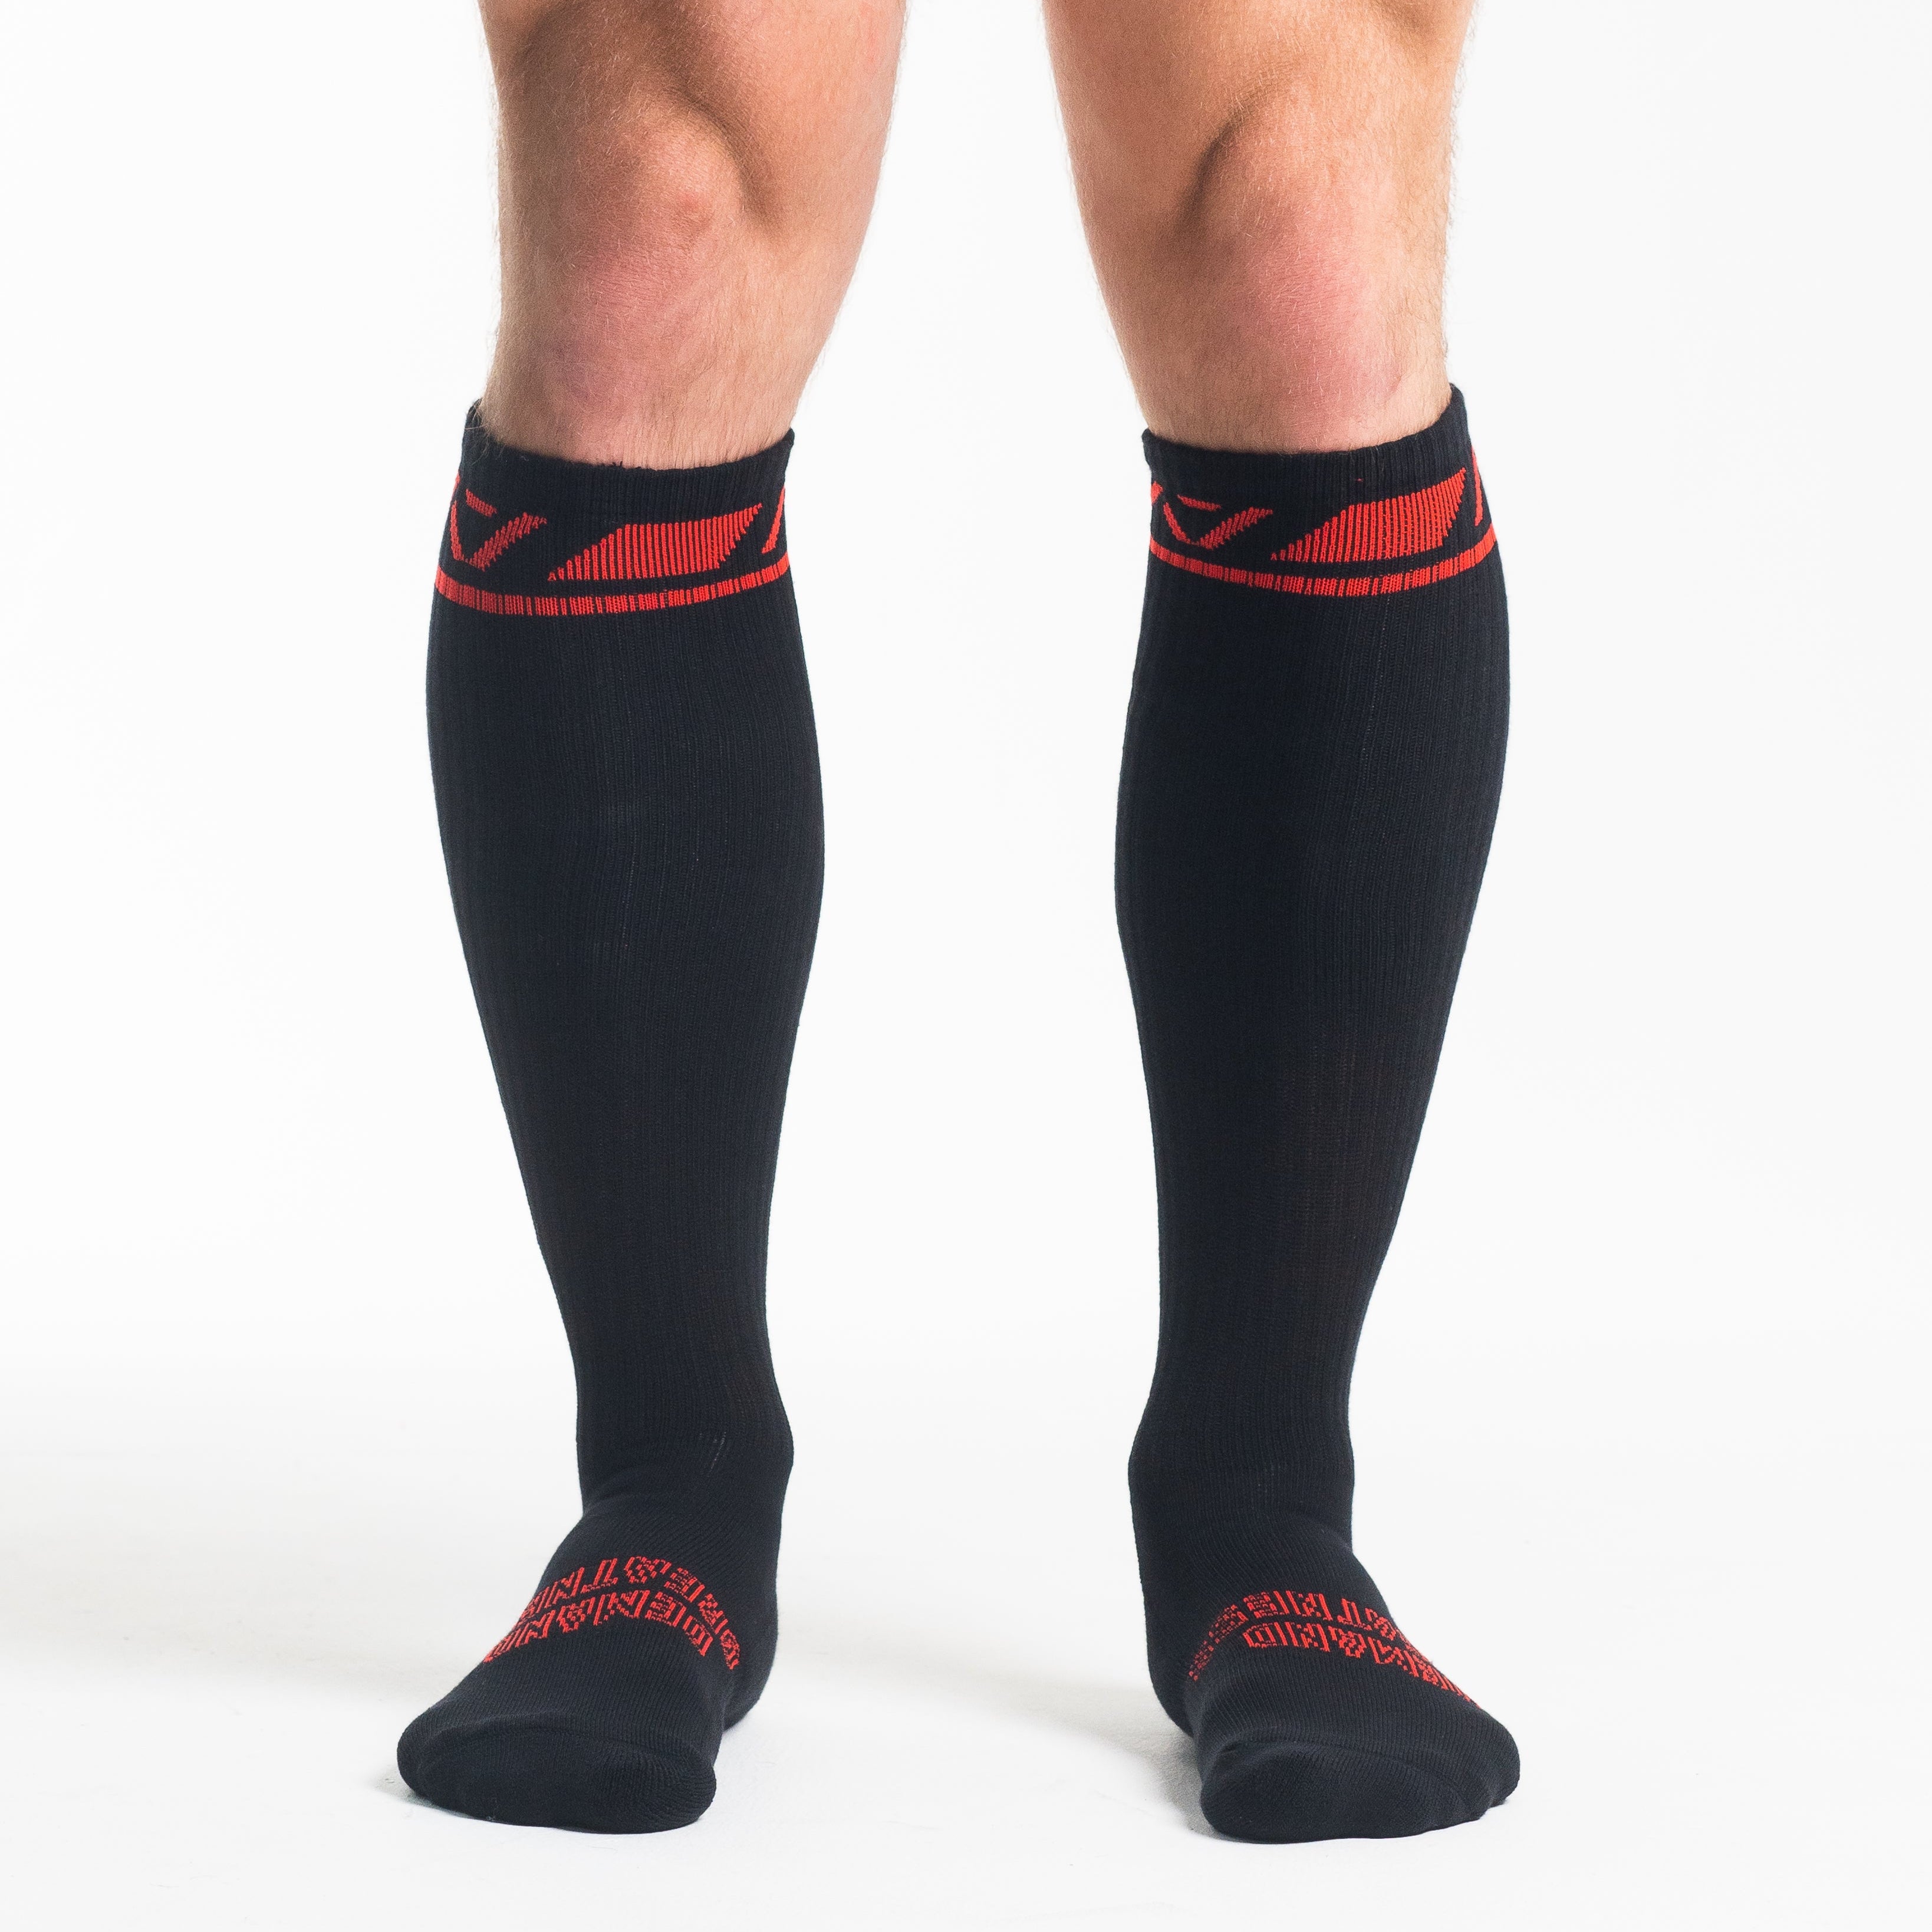 A7 Red Dawn Deadlift socks are designed specifically for pulls and keep your shins protected from scrapes. A7 deadlift socks are a perfect pair to wear in training or powerlifting competition. The IPF Approved Kit includes Powerlifting Singlet, A7 Meet Shirt, A7 Zebra Wrist Wraps, A7 Deadlift Socks, Hourglass Knee Sleeves (Stiff Knee Sleeves and Rigor Mortis Knee Sleeves). Genouillères powerlifting shipping to France, Spain, Ireland, Germany, Italy, Sweden and EU.